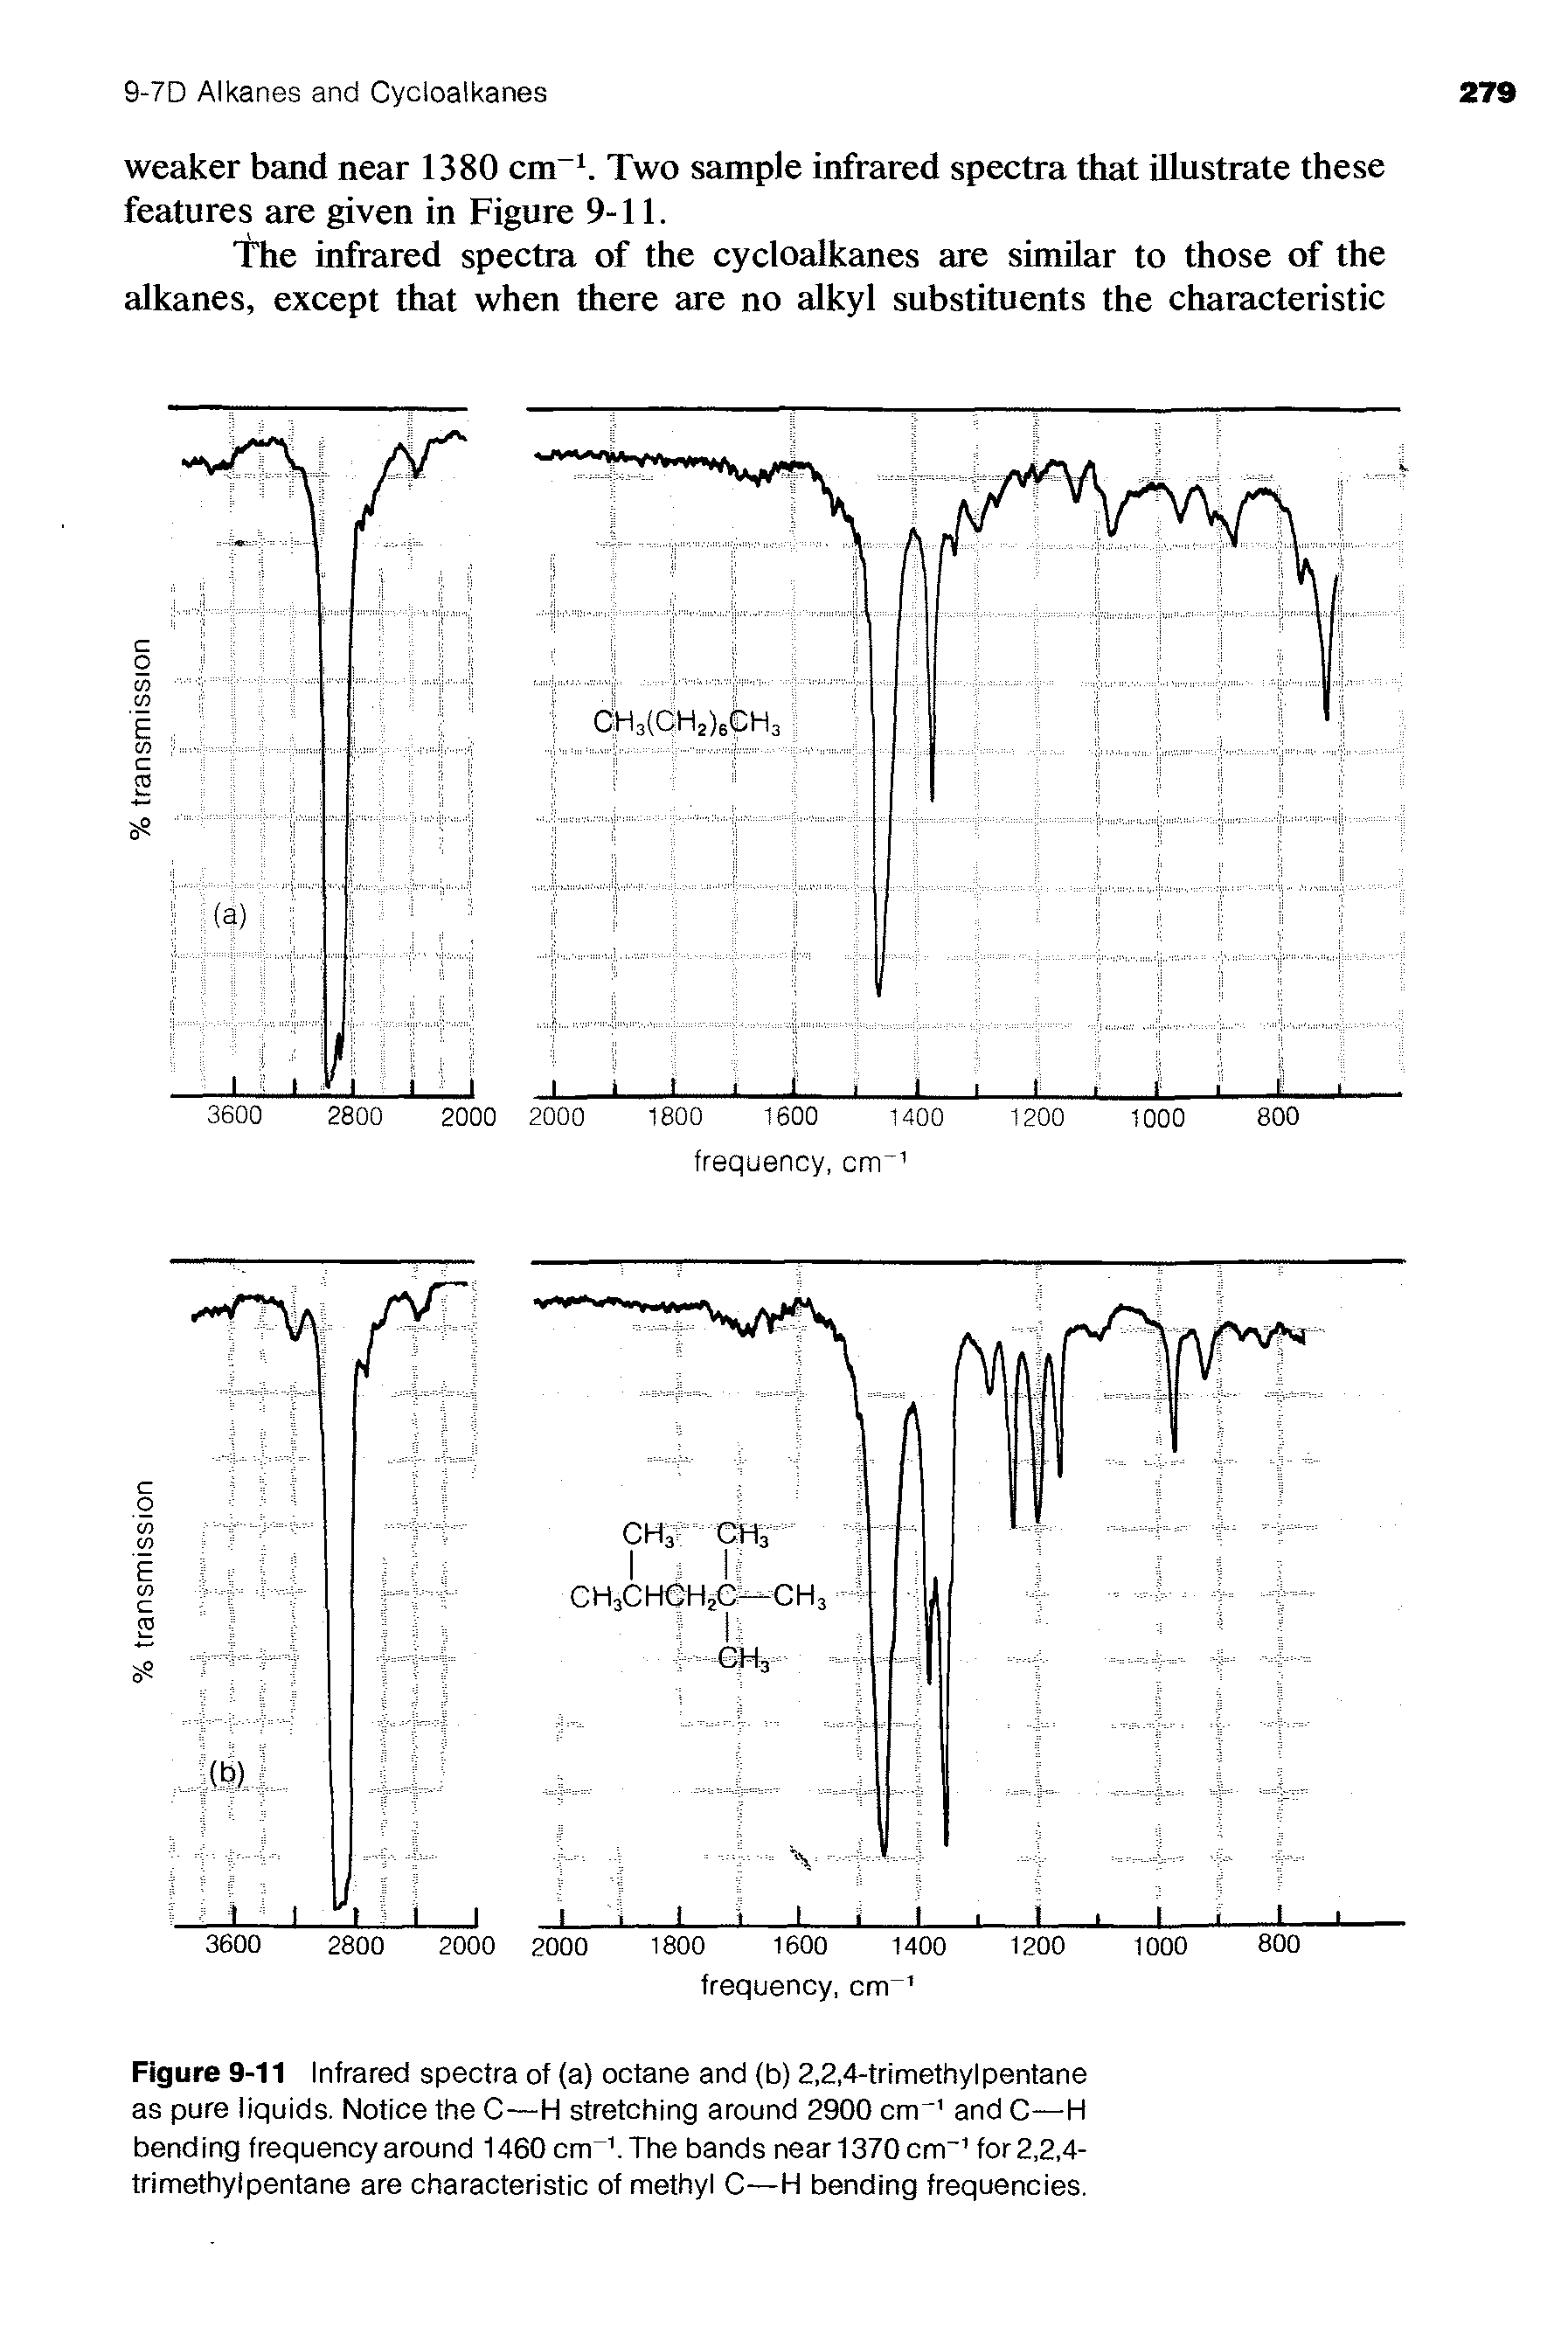 Figure 9-11 Infrared spectra of (a) octane and (b) 2,2,4-trimethyl pentane as pure liquids. Notice the C—H stretching around 2900 cm 1 and C—H bending frequency around 1460 cm-1. The bands near 1370 cm-1 for 2,2,4-trimethylpentane are characteristic of methyl C—H bending frequencies.